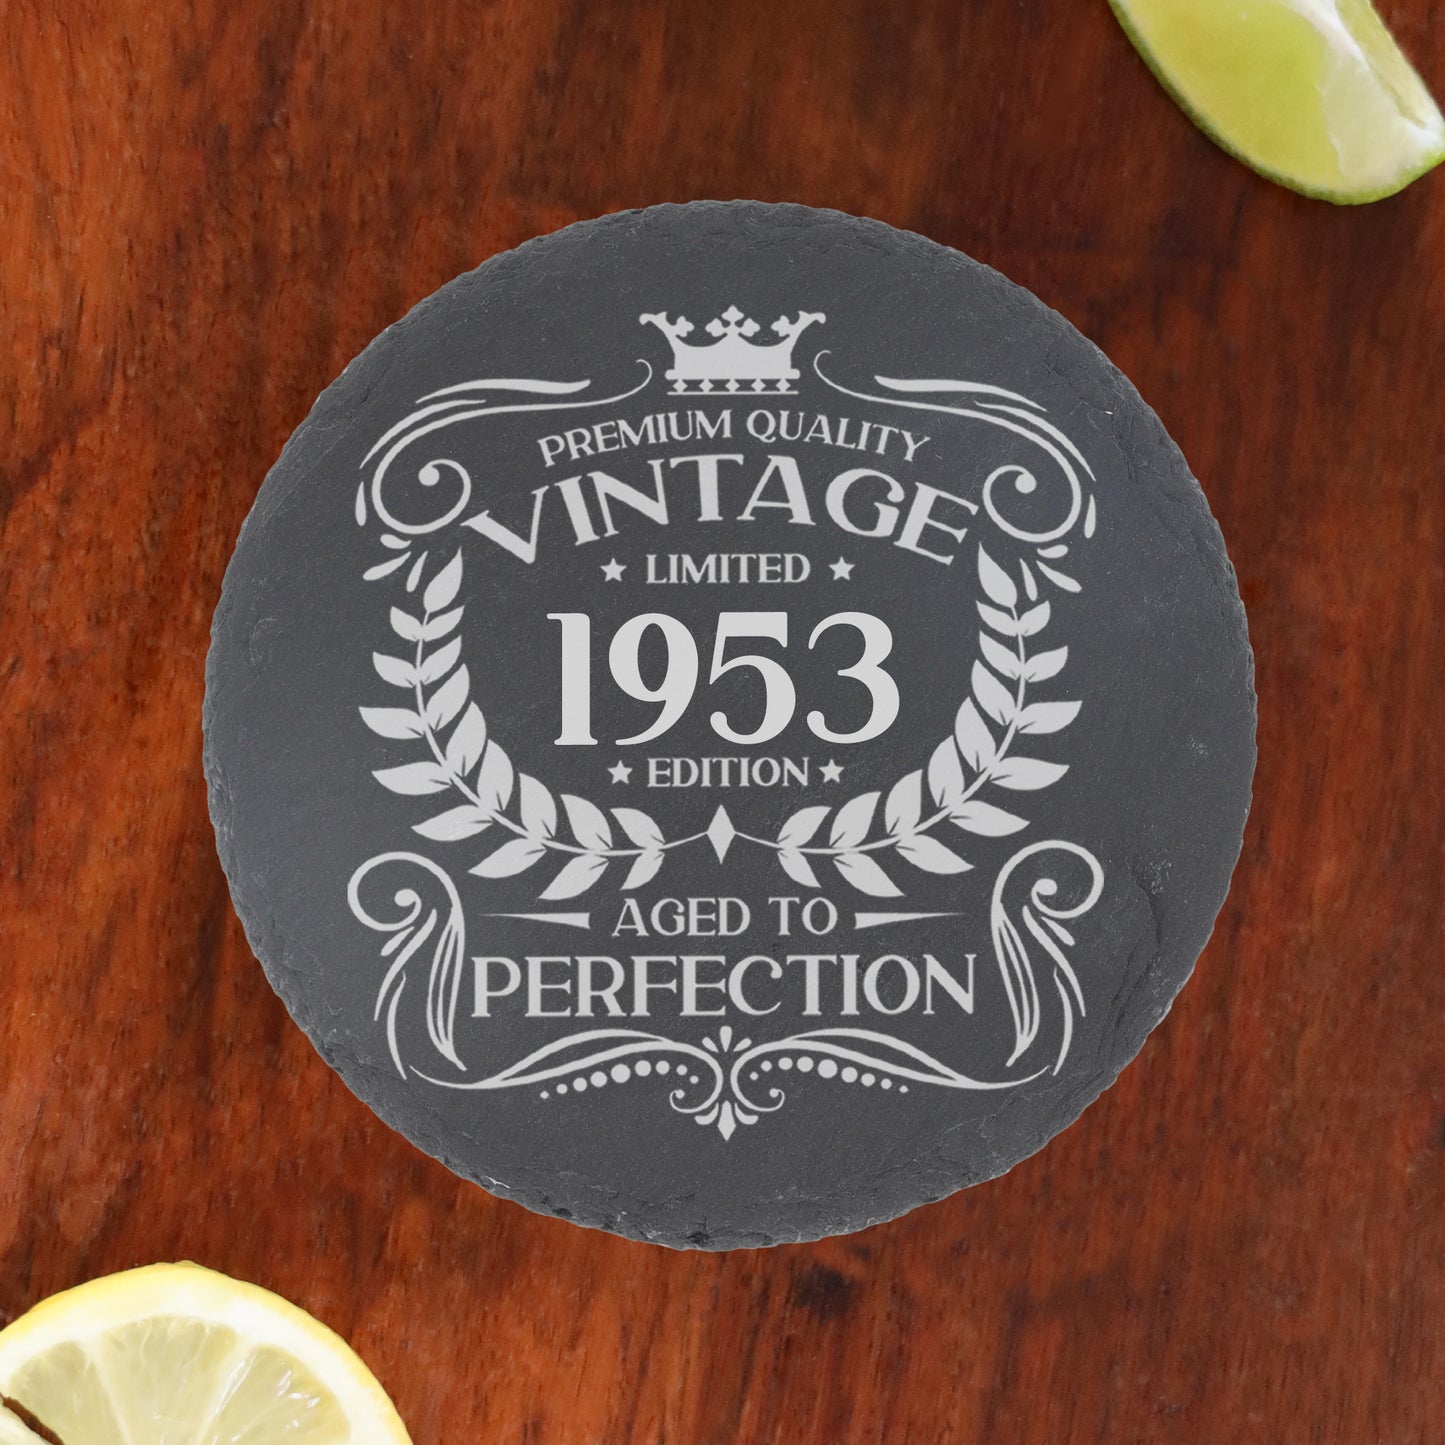 Personalised Vintage 1953 Mug and/or Coaster  - Always Looking Good - Round Coaster On Its Own  